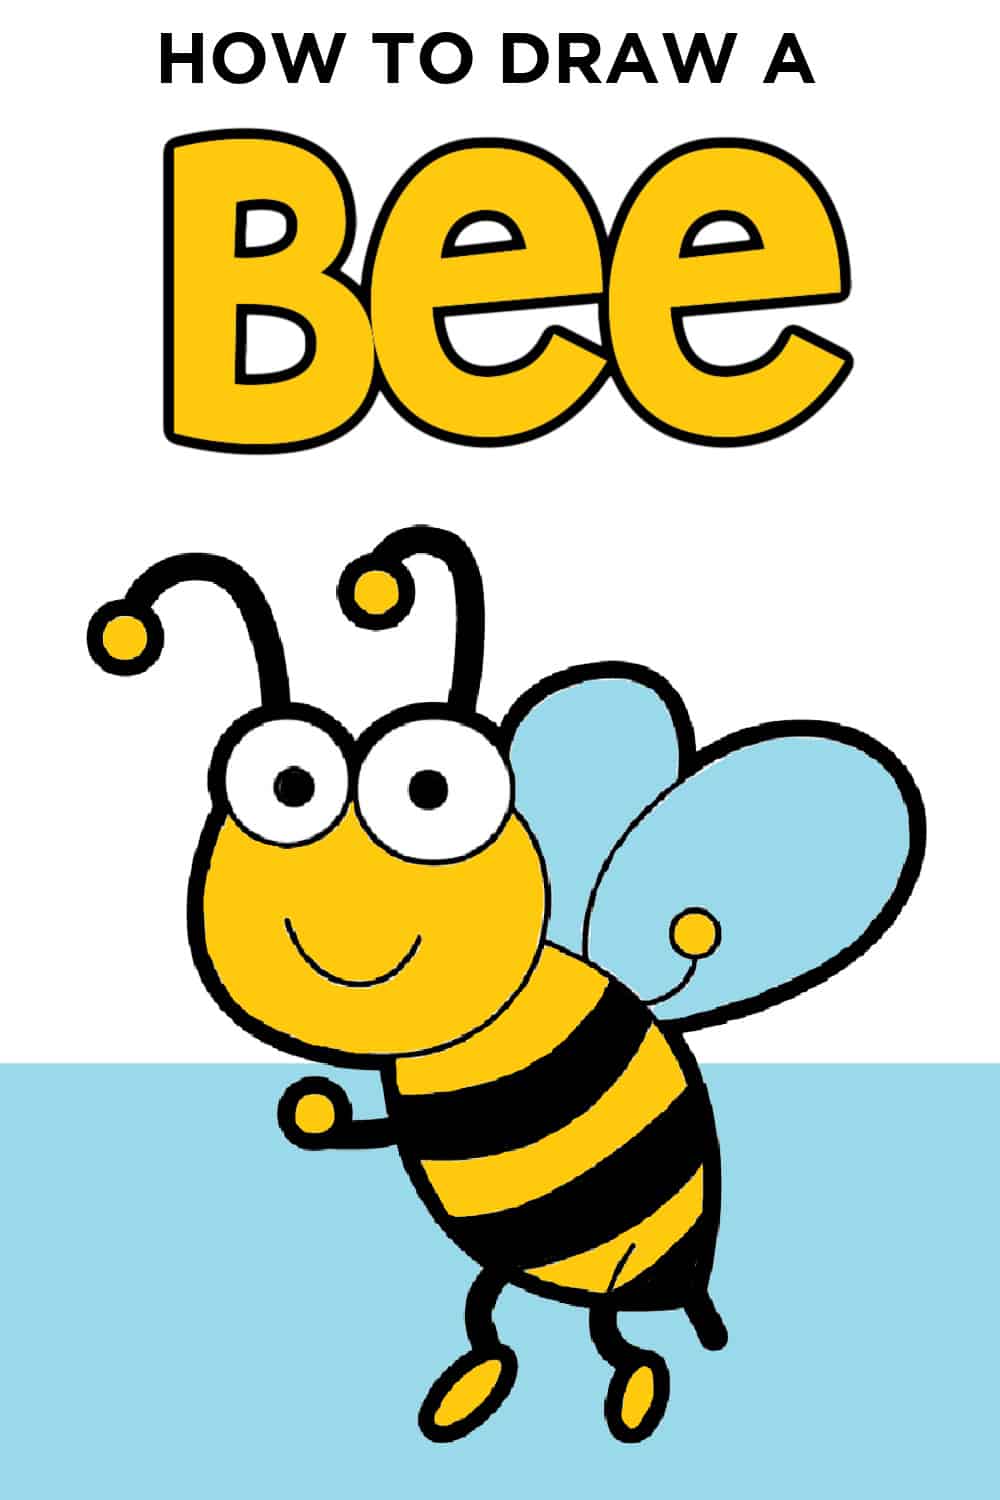 How to draw a bee - step by step instruction for children